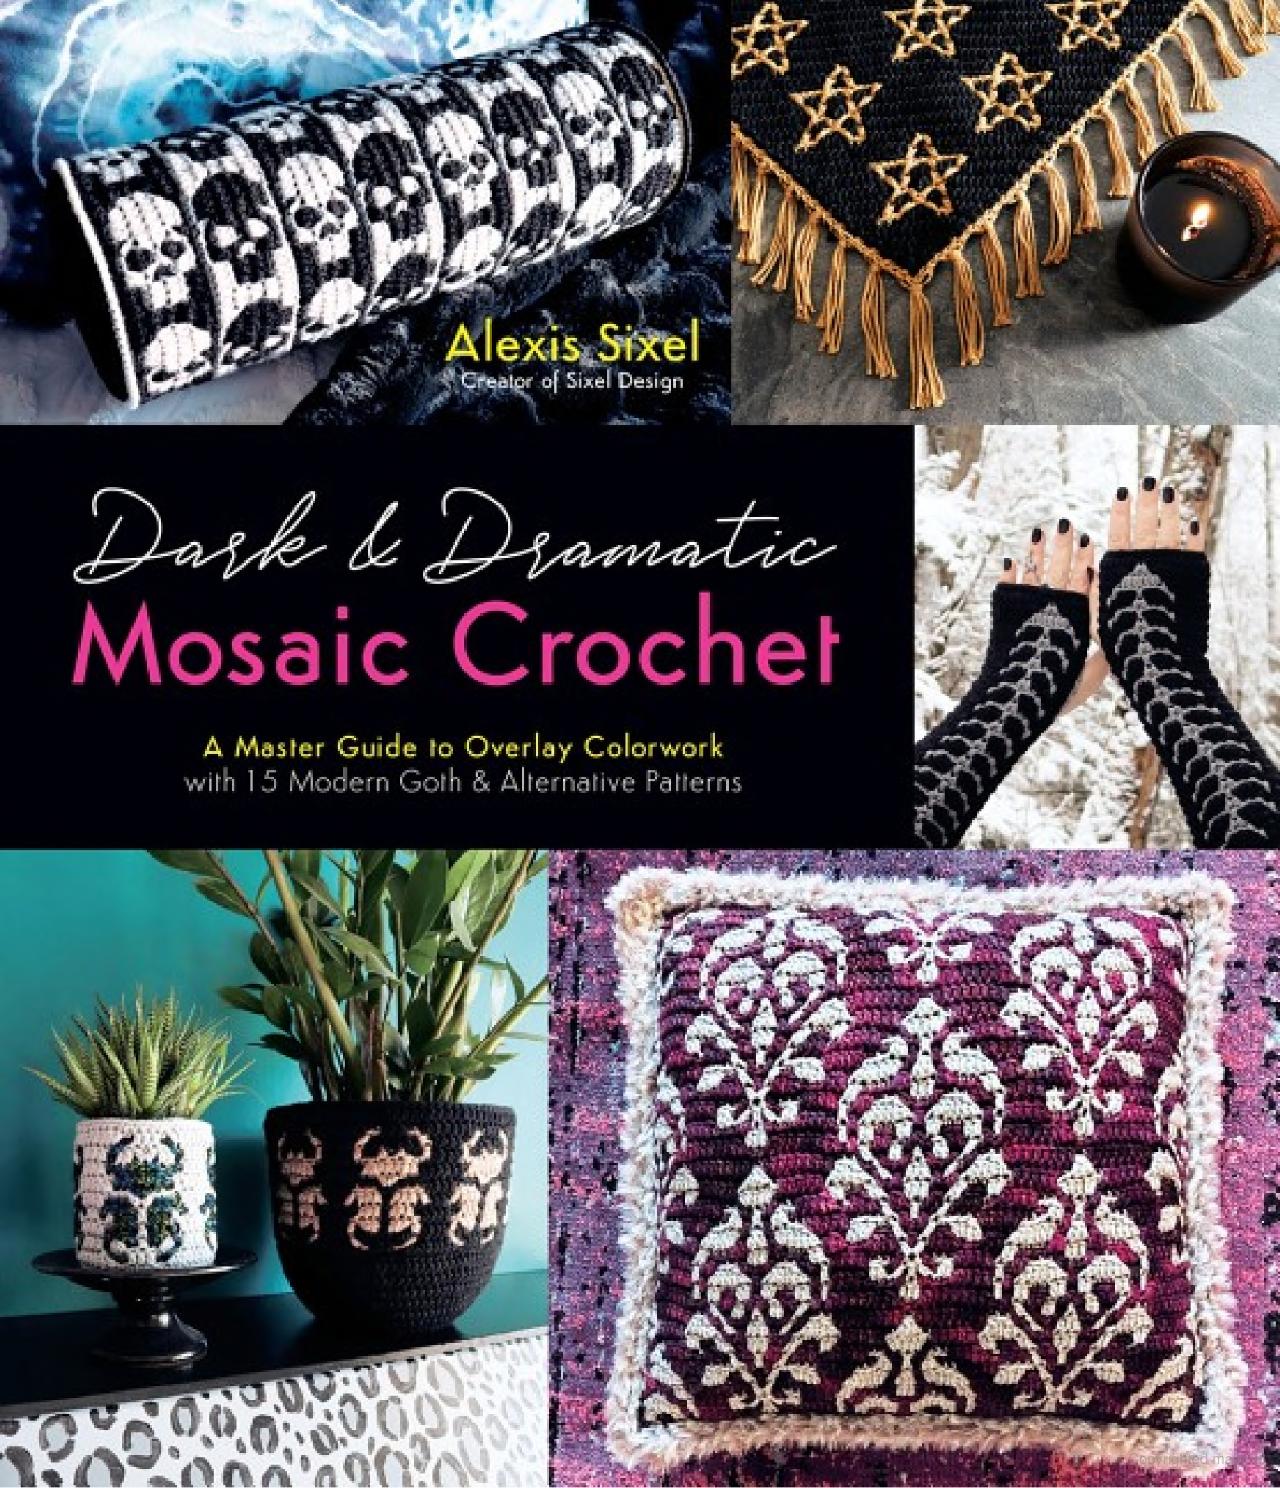 Dark and Dramatic Mosaic Crochet by Alexis Sixel